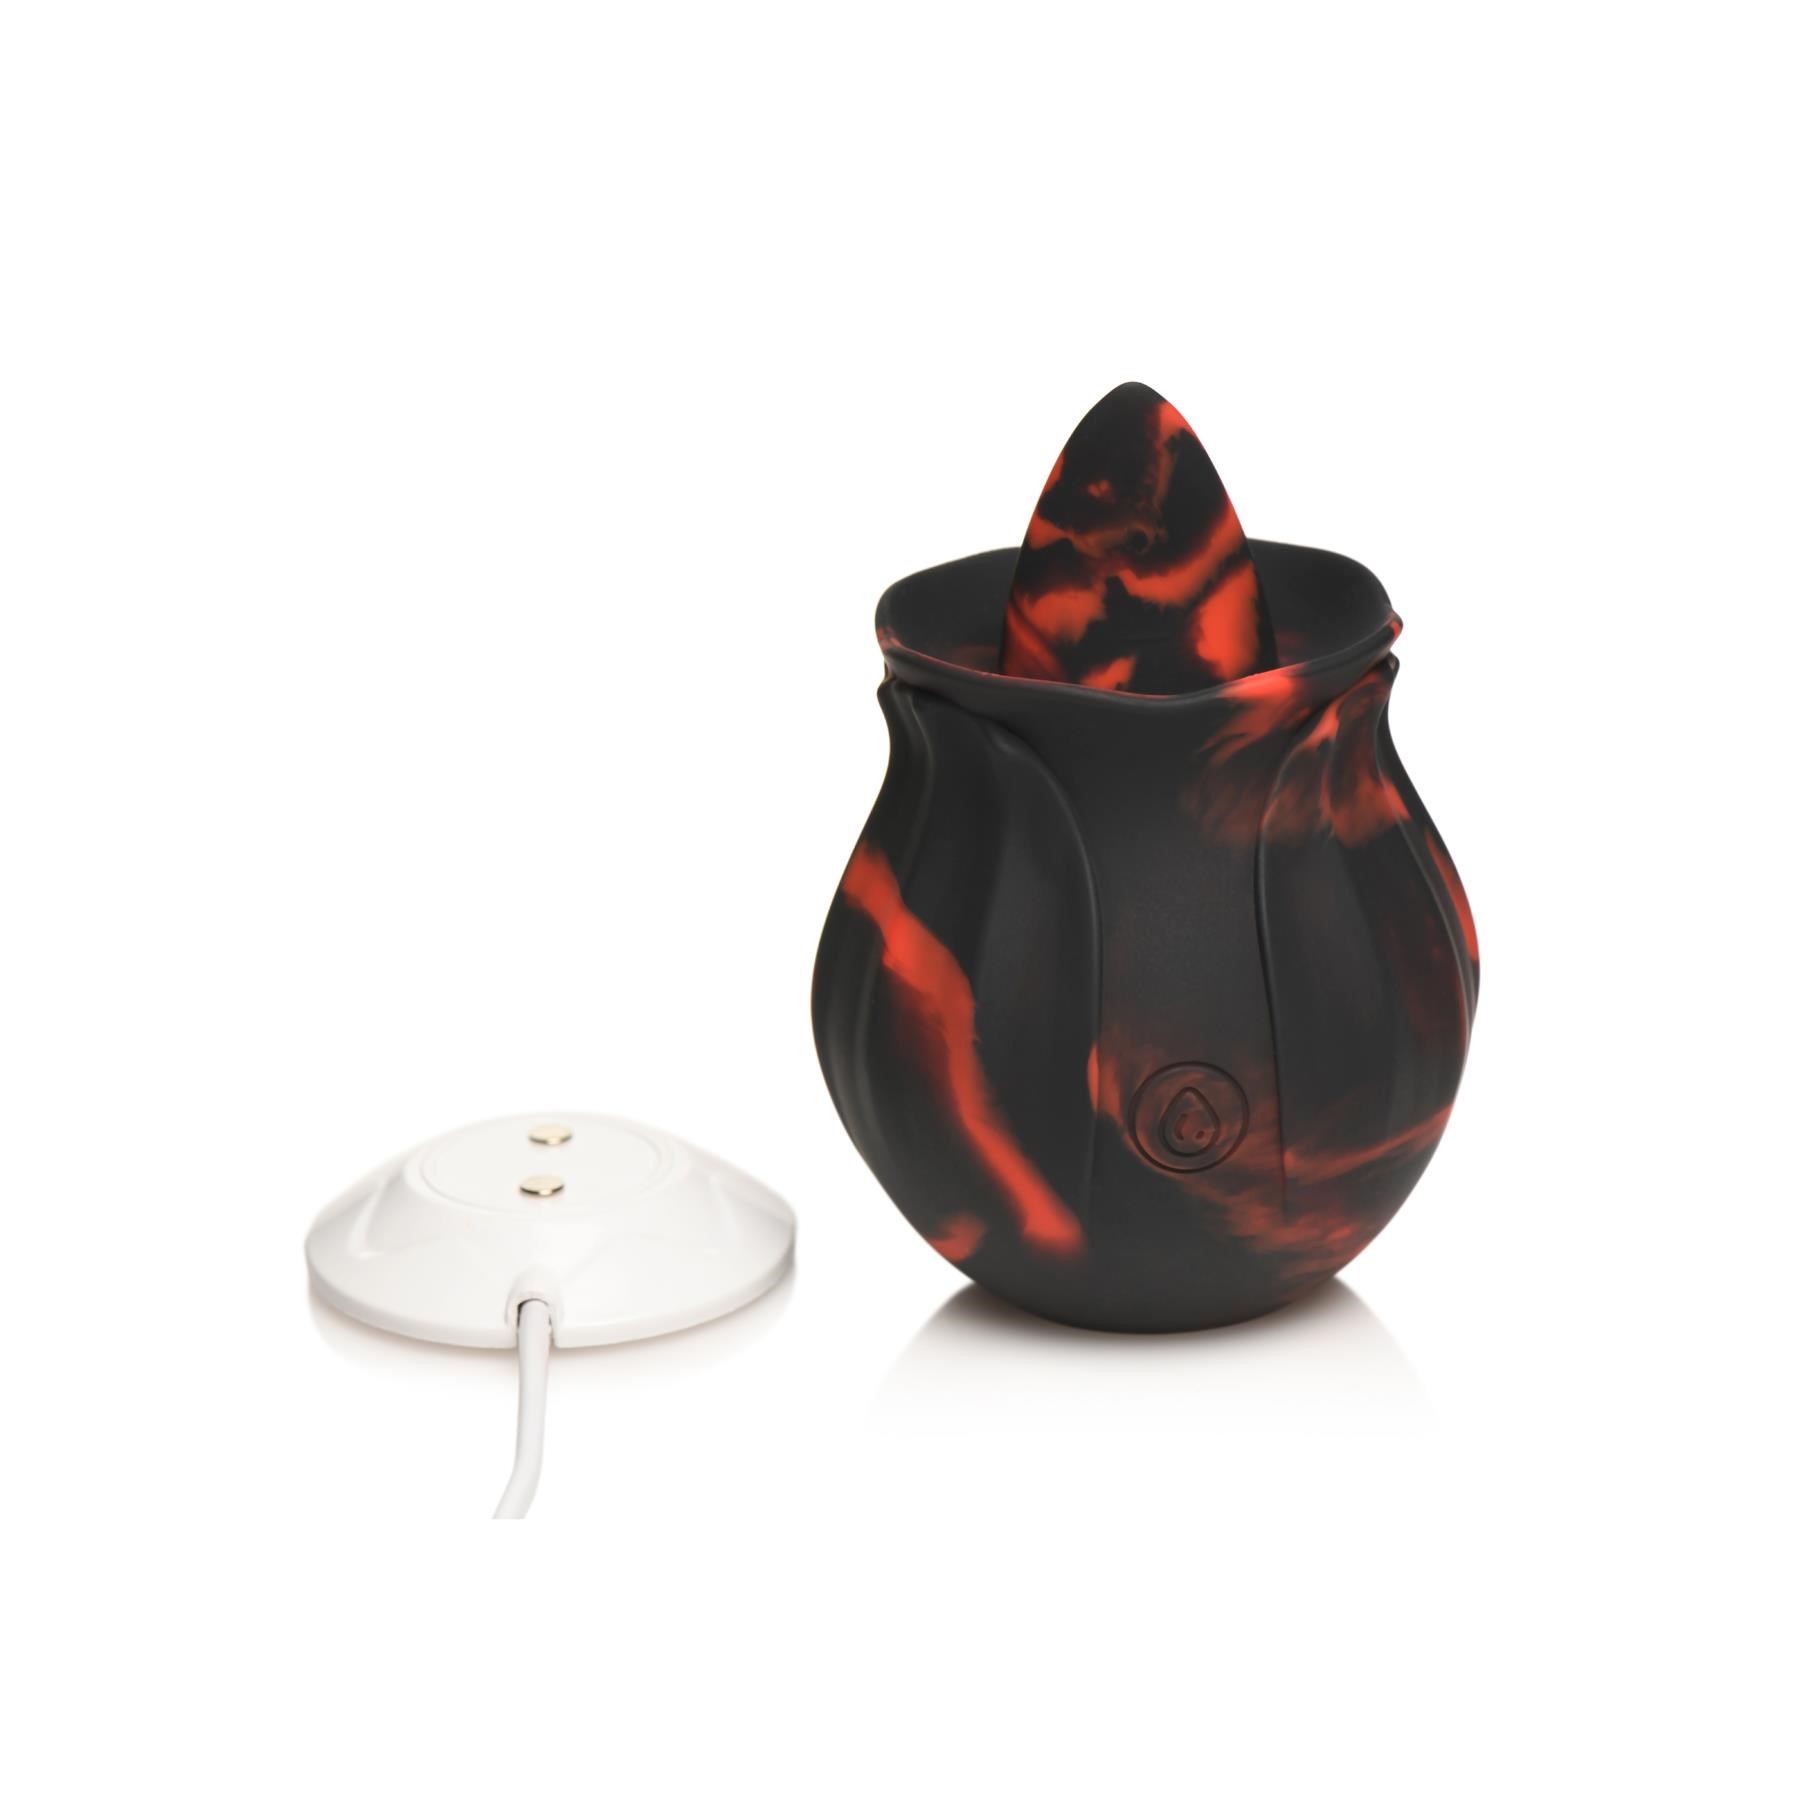 Bloomgasm Black Kiss Rimming Rose - Product and Charging Dock